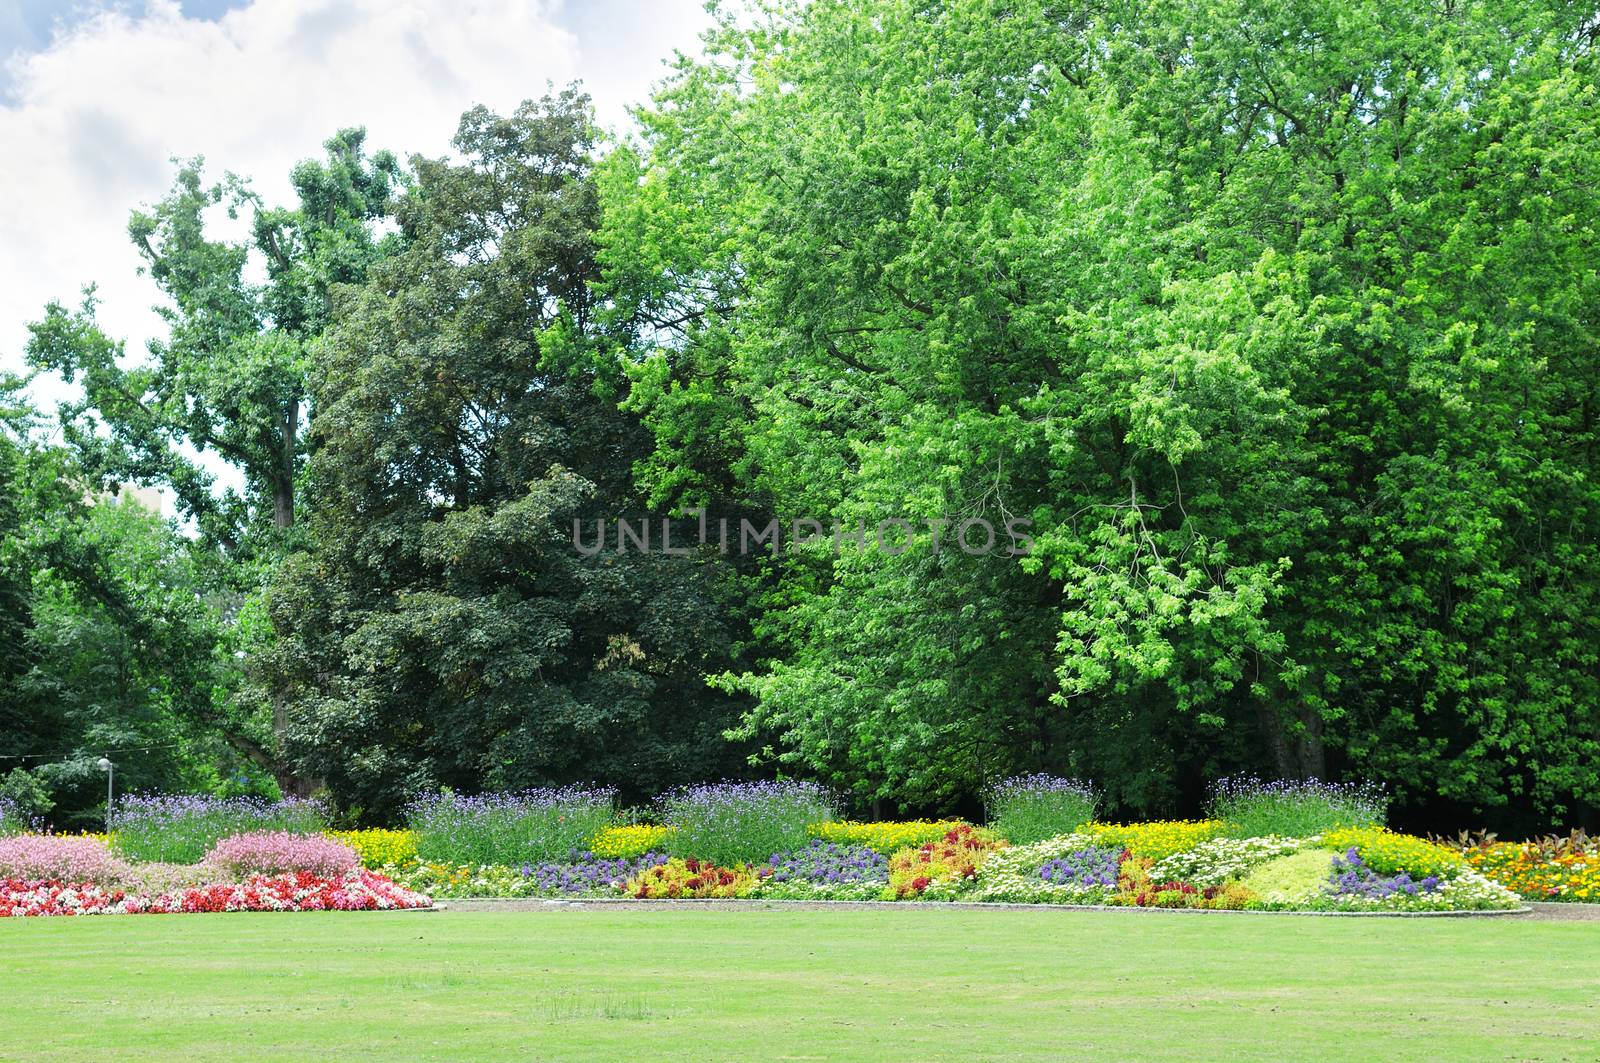 Blossoming flowerbeds in the park